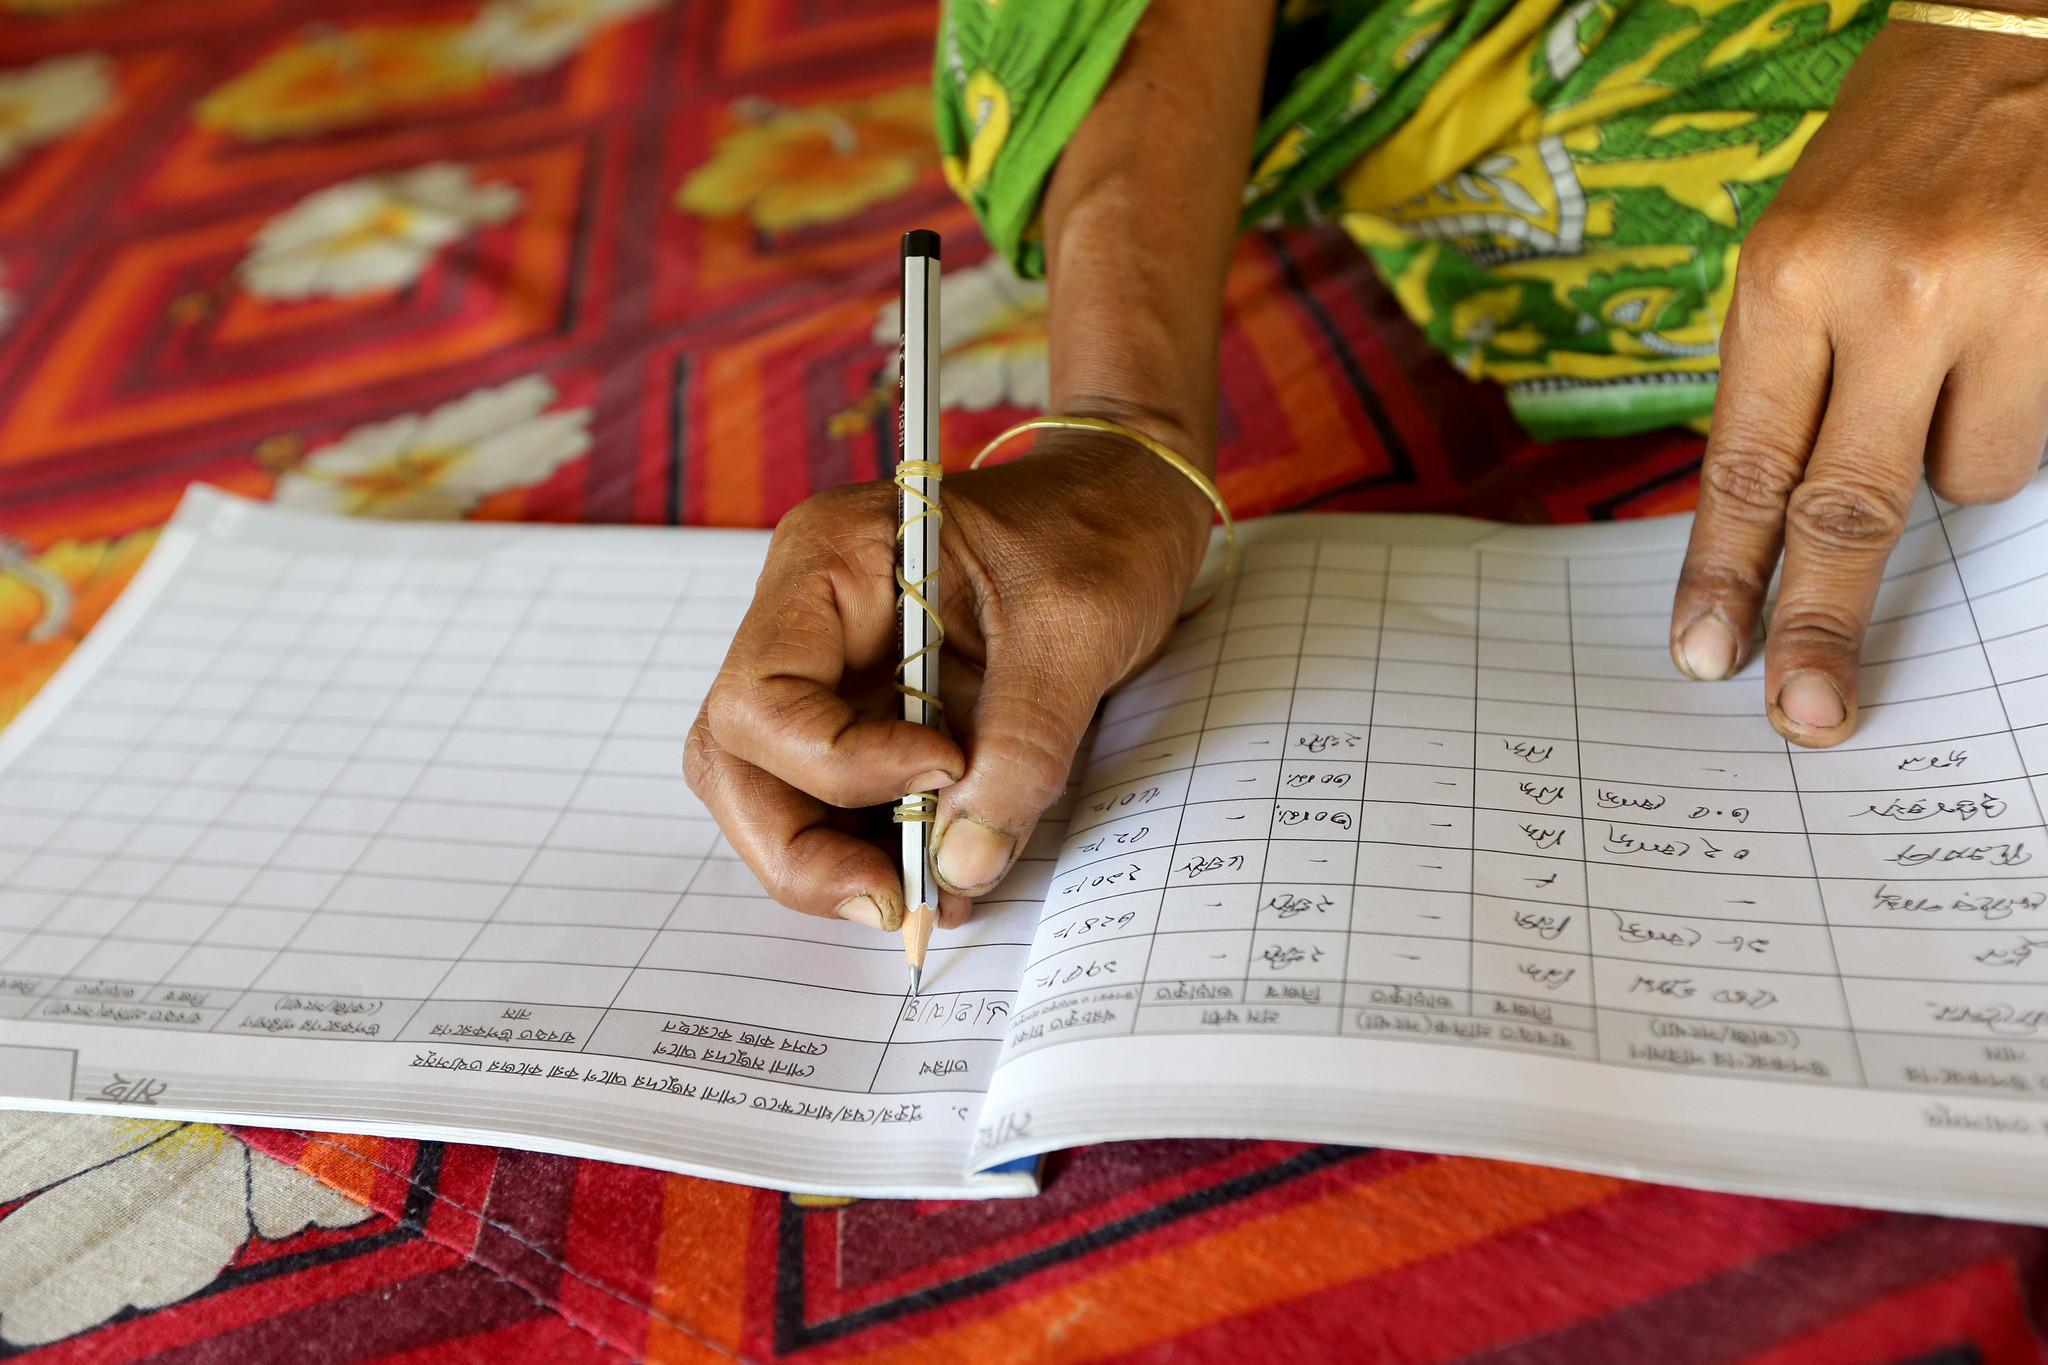 A woman writing data on her data entry book in Jessore, Bangladesh. Photo by M. Yousuf Tushar.